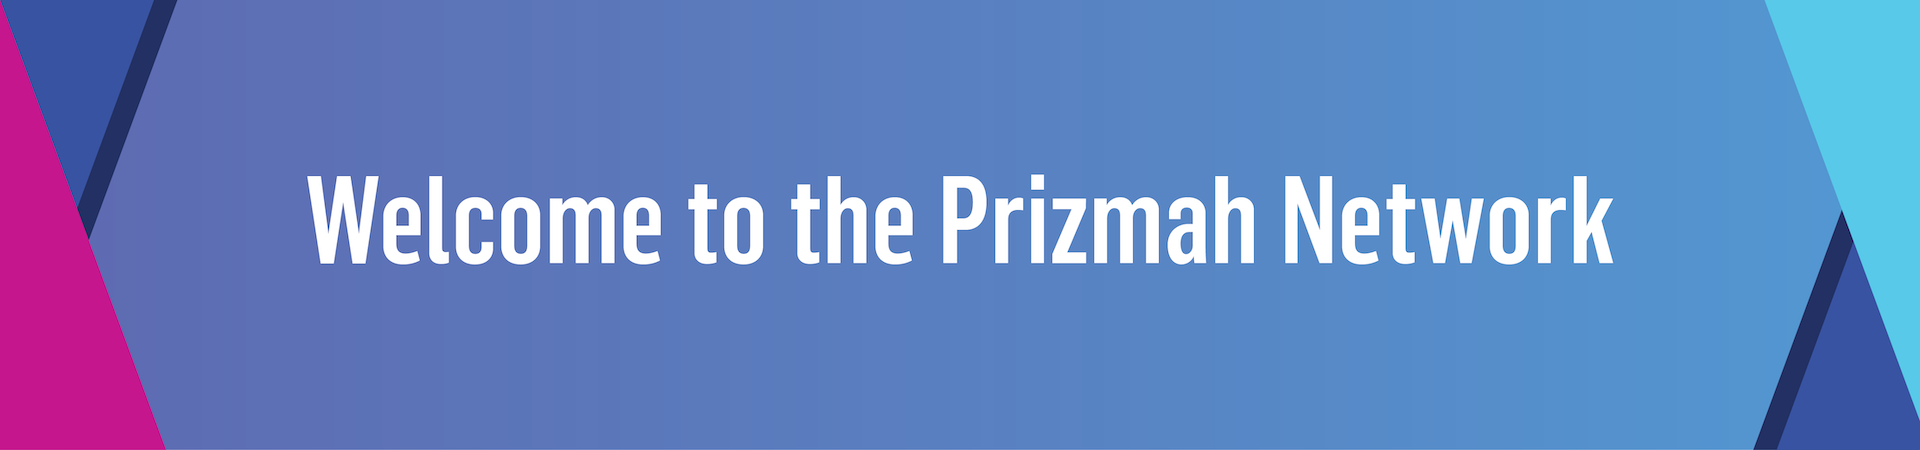 Welcome to the Prizmah Network